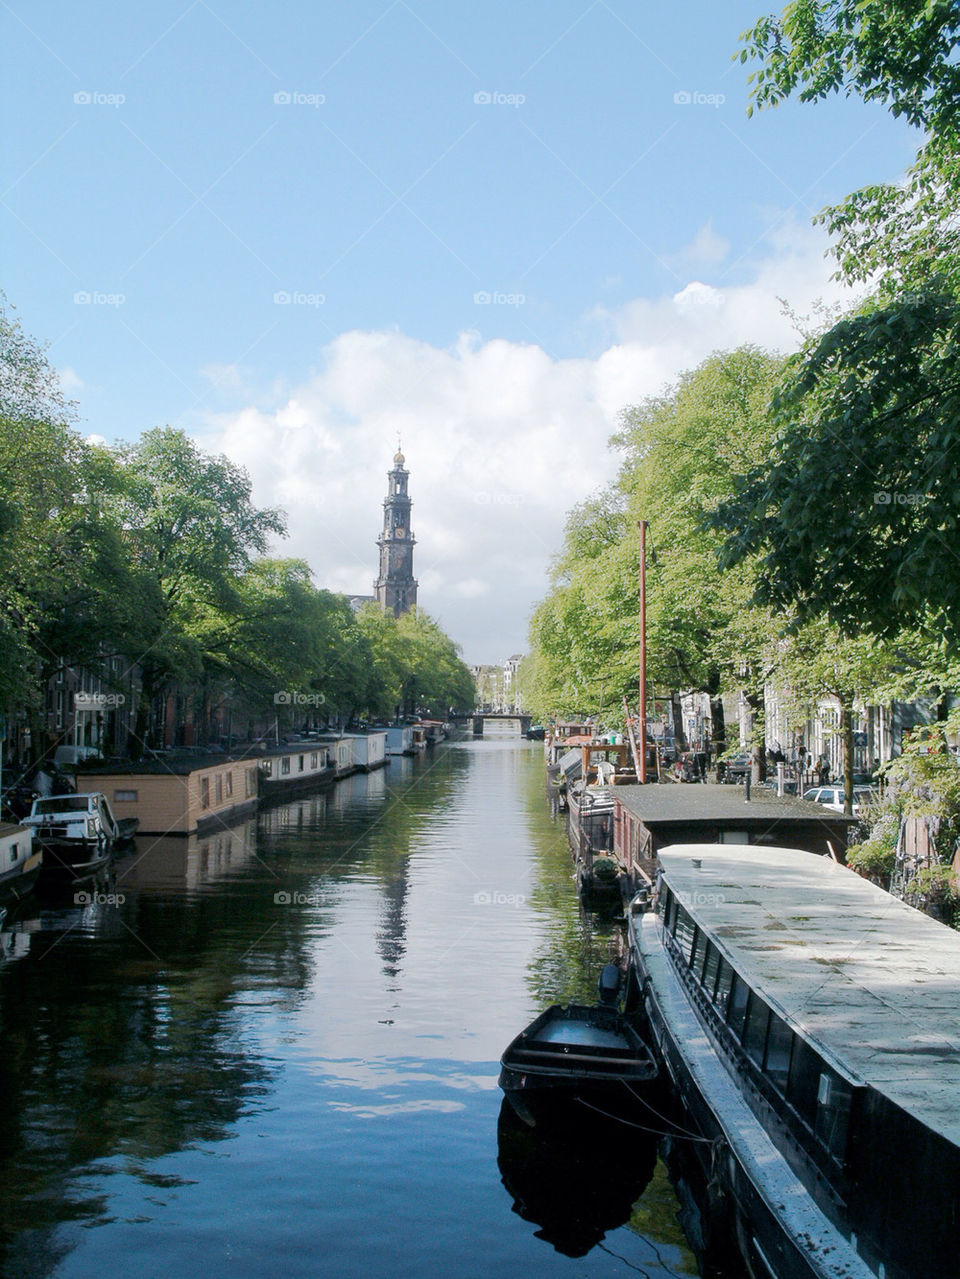 netherlands canal amsterdam europe by dbeck03